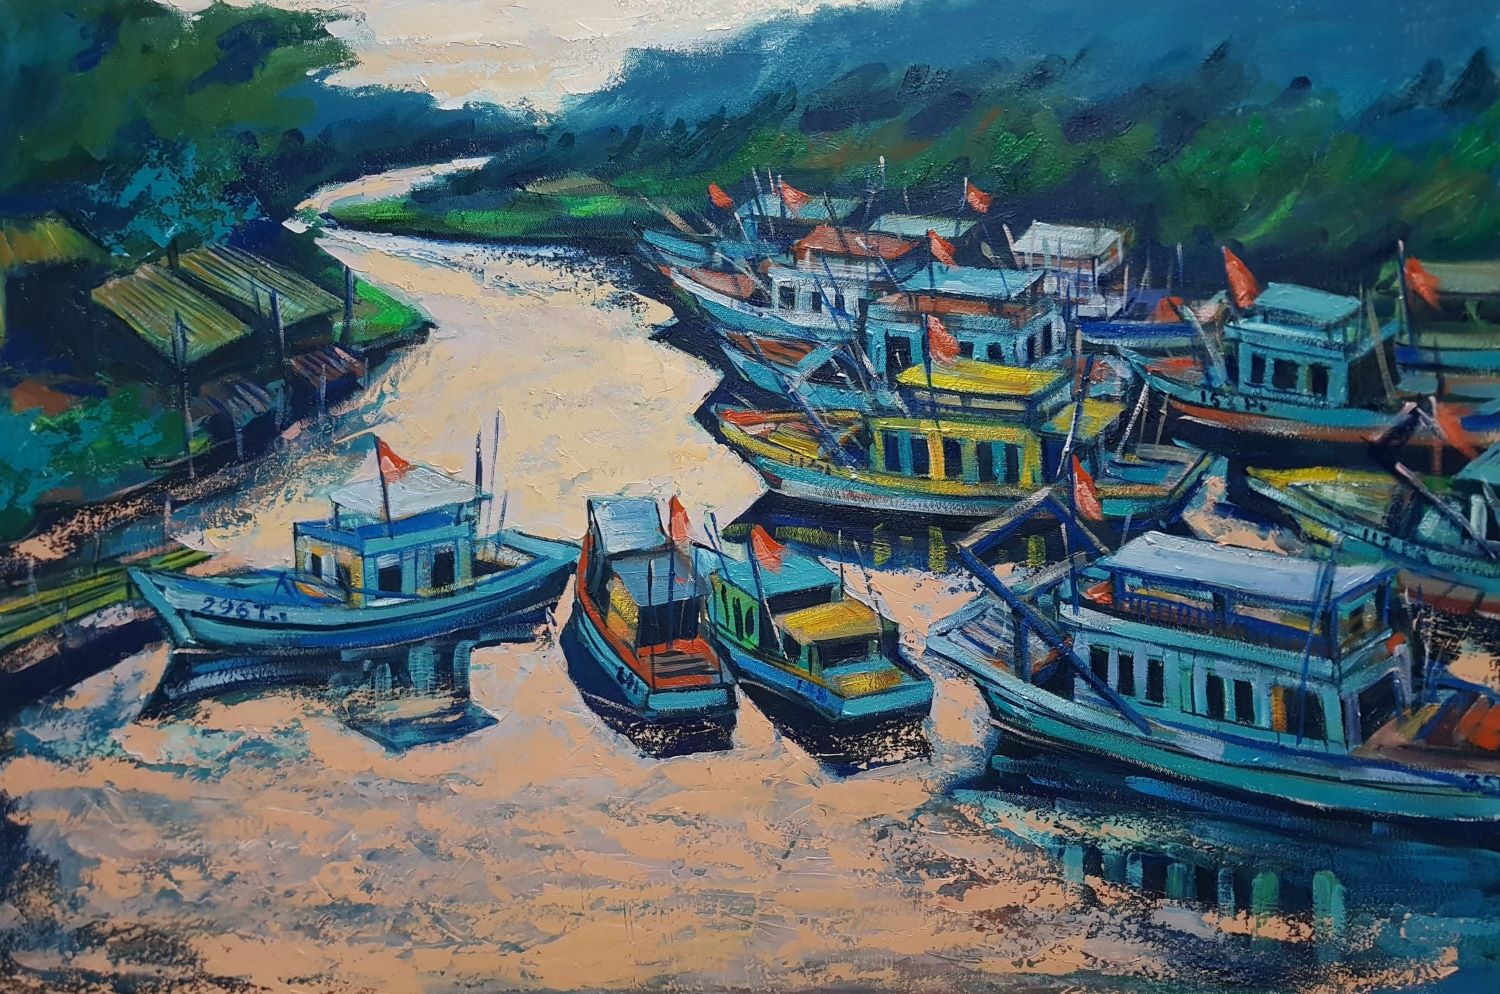 The Wharf - Vietnamese Oil Painting Landscape by Artist Minh Chinh